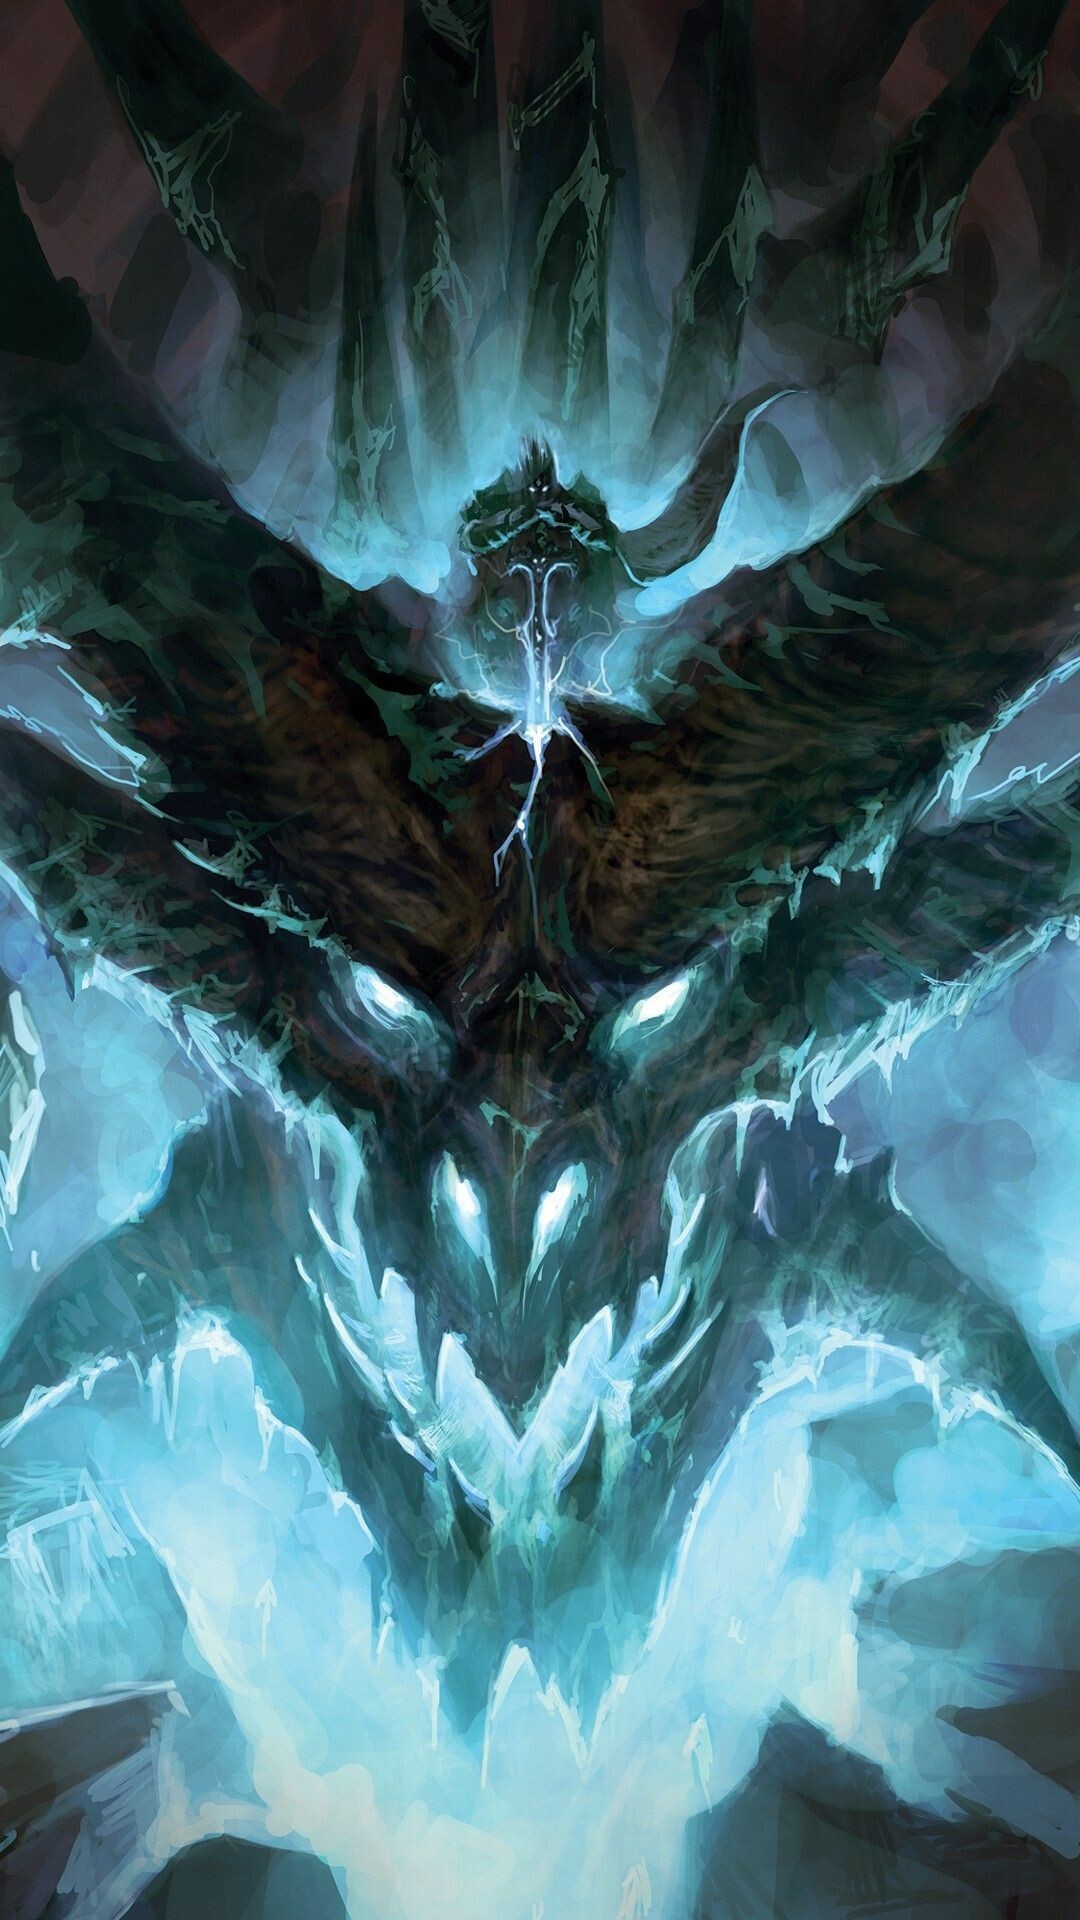 World of Warcraft: Sindragosa, The Frost Queen, Queen of the Frostbrood. 1080x1920 Full HD Wallpaper.